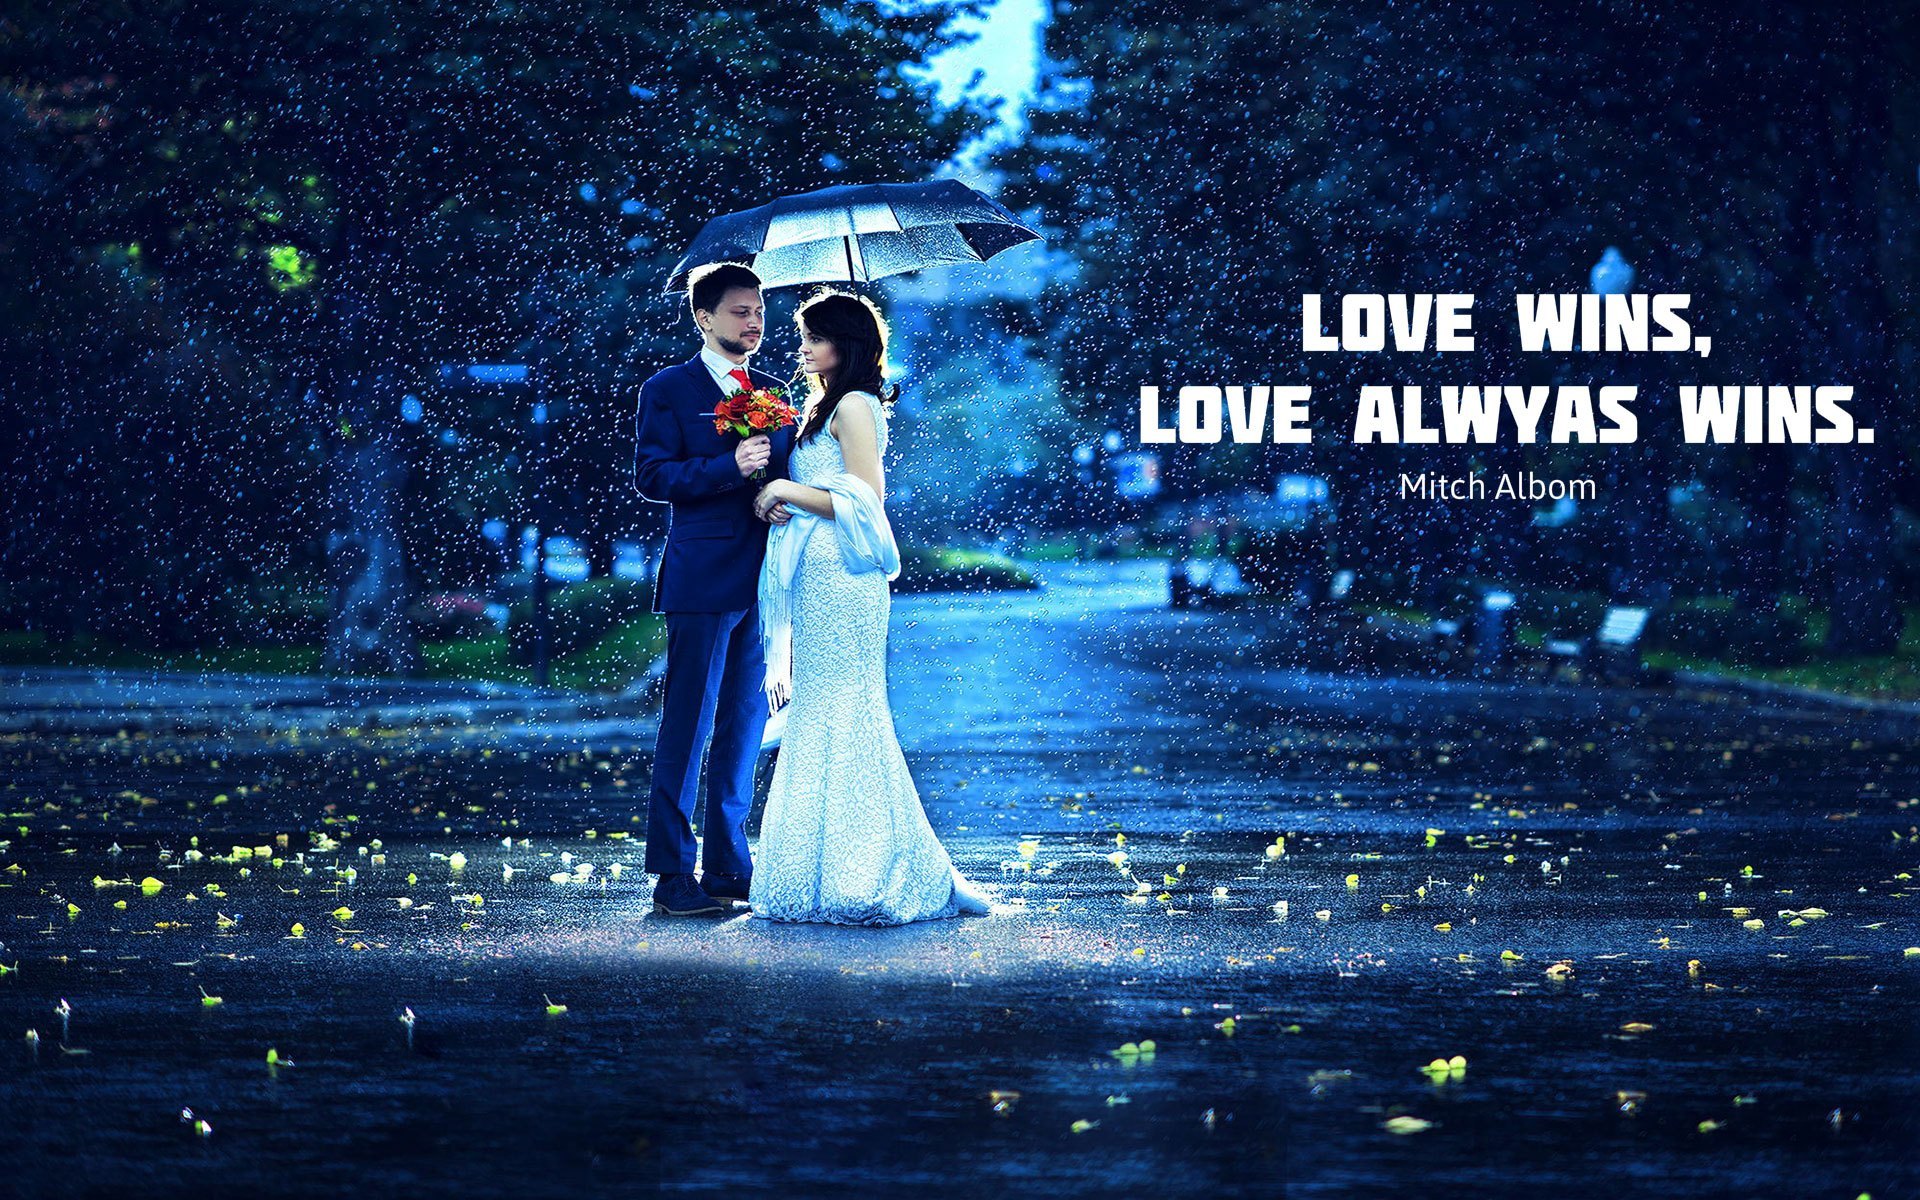 Cute Hd Love And Romance Pictures Of Couples In Rain - Love Couples In Rain With Quotes , HD Wallpaper & Backgrounds